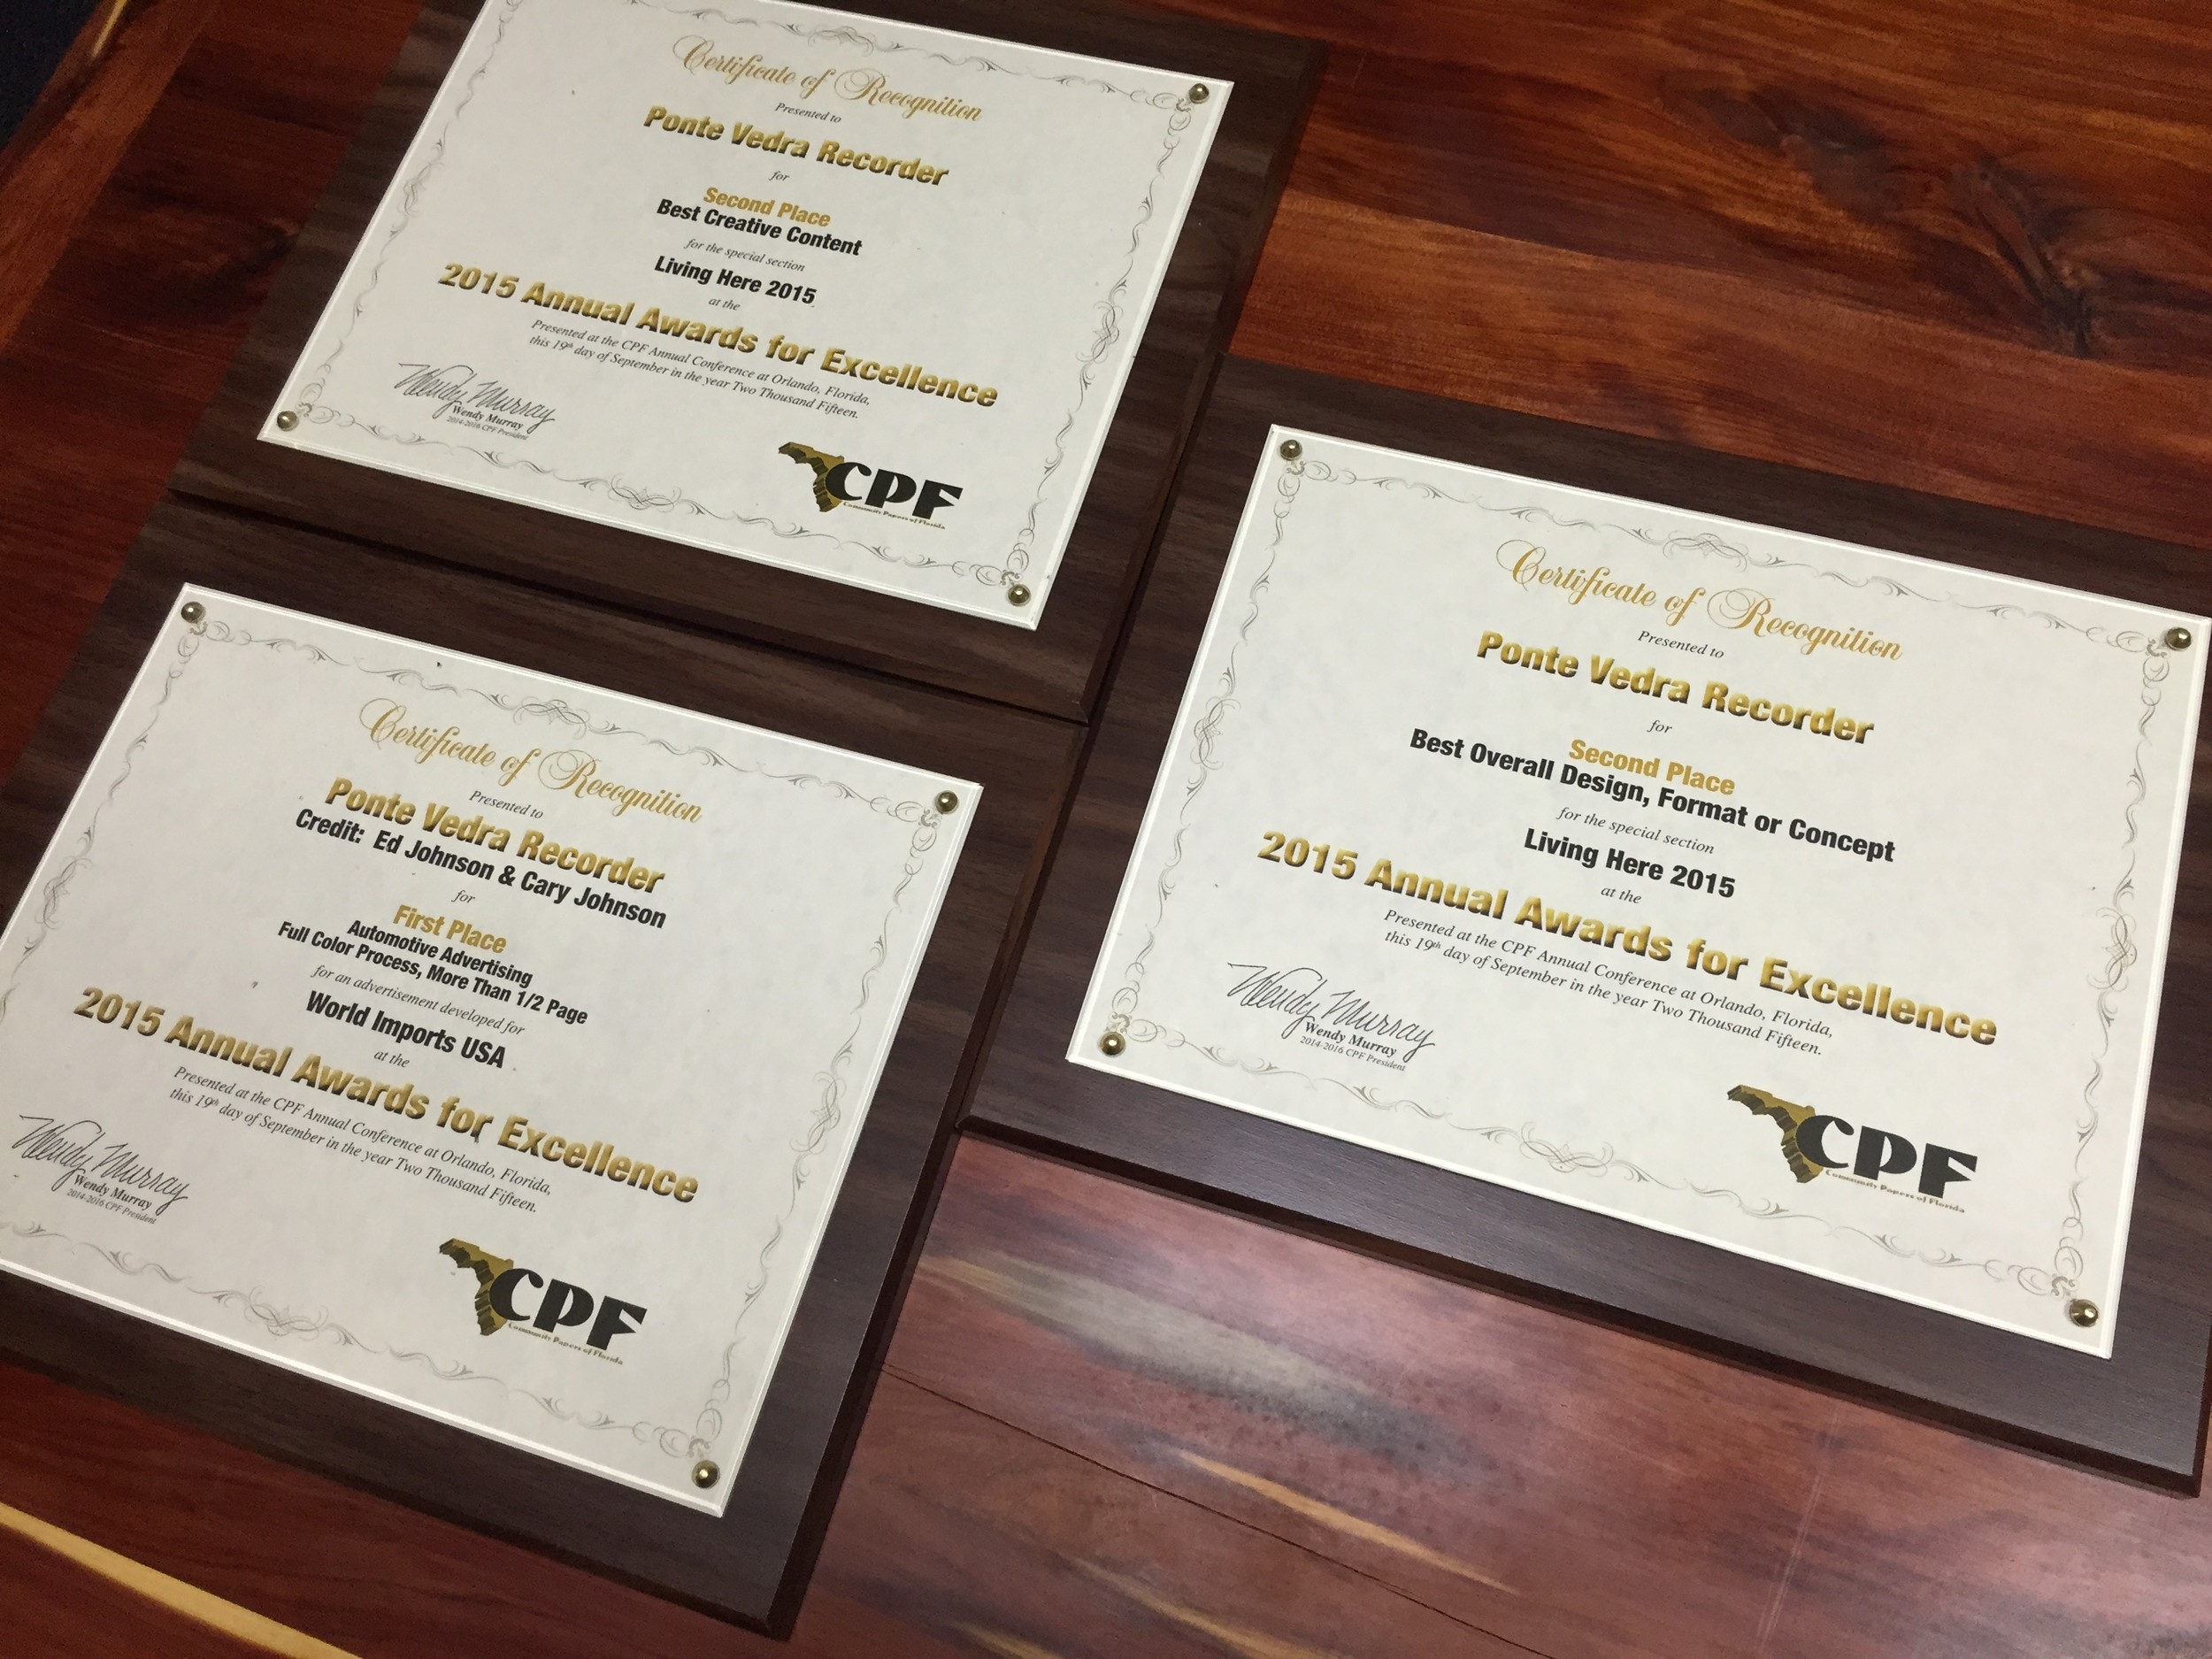 Awards included first-place recognition for an advertisement in the Ponte Vedra Recorder, and second place for Best Overally Design, Format or Concept for the annual publication, Living Here.